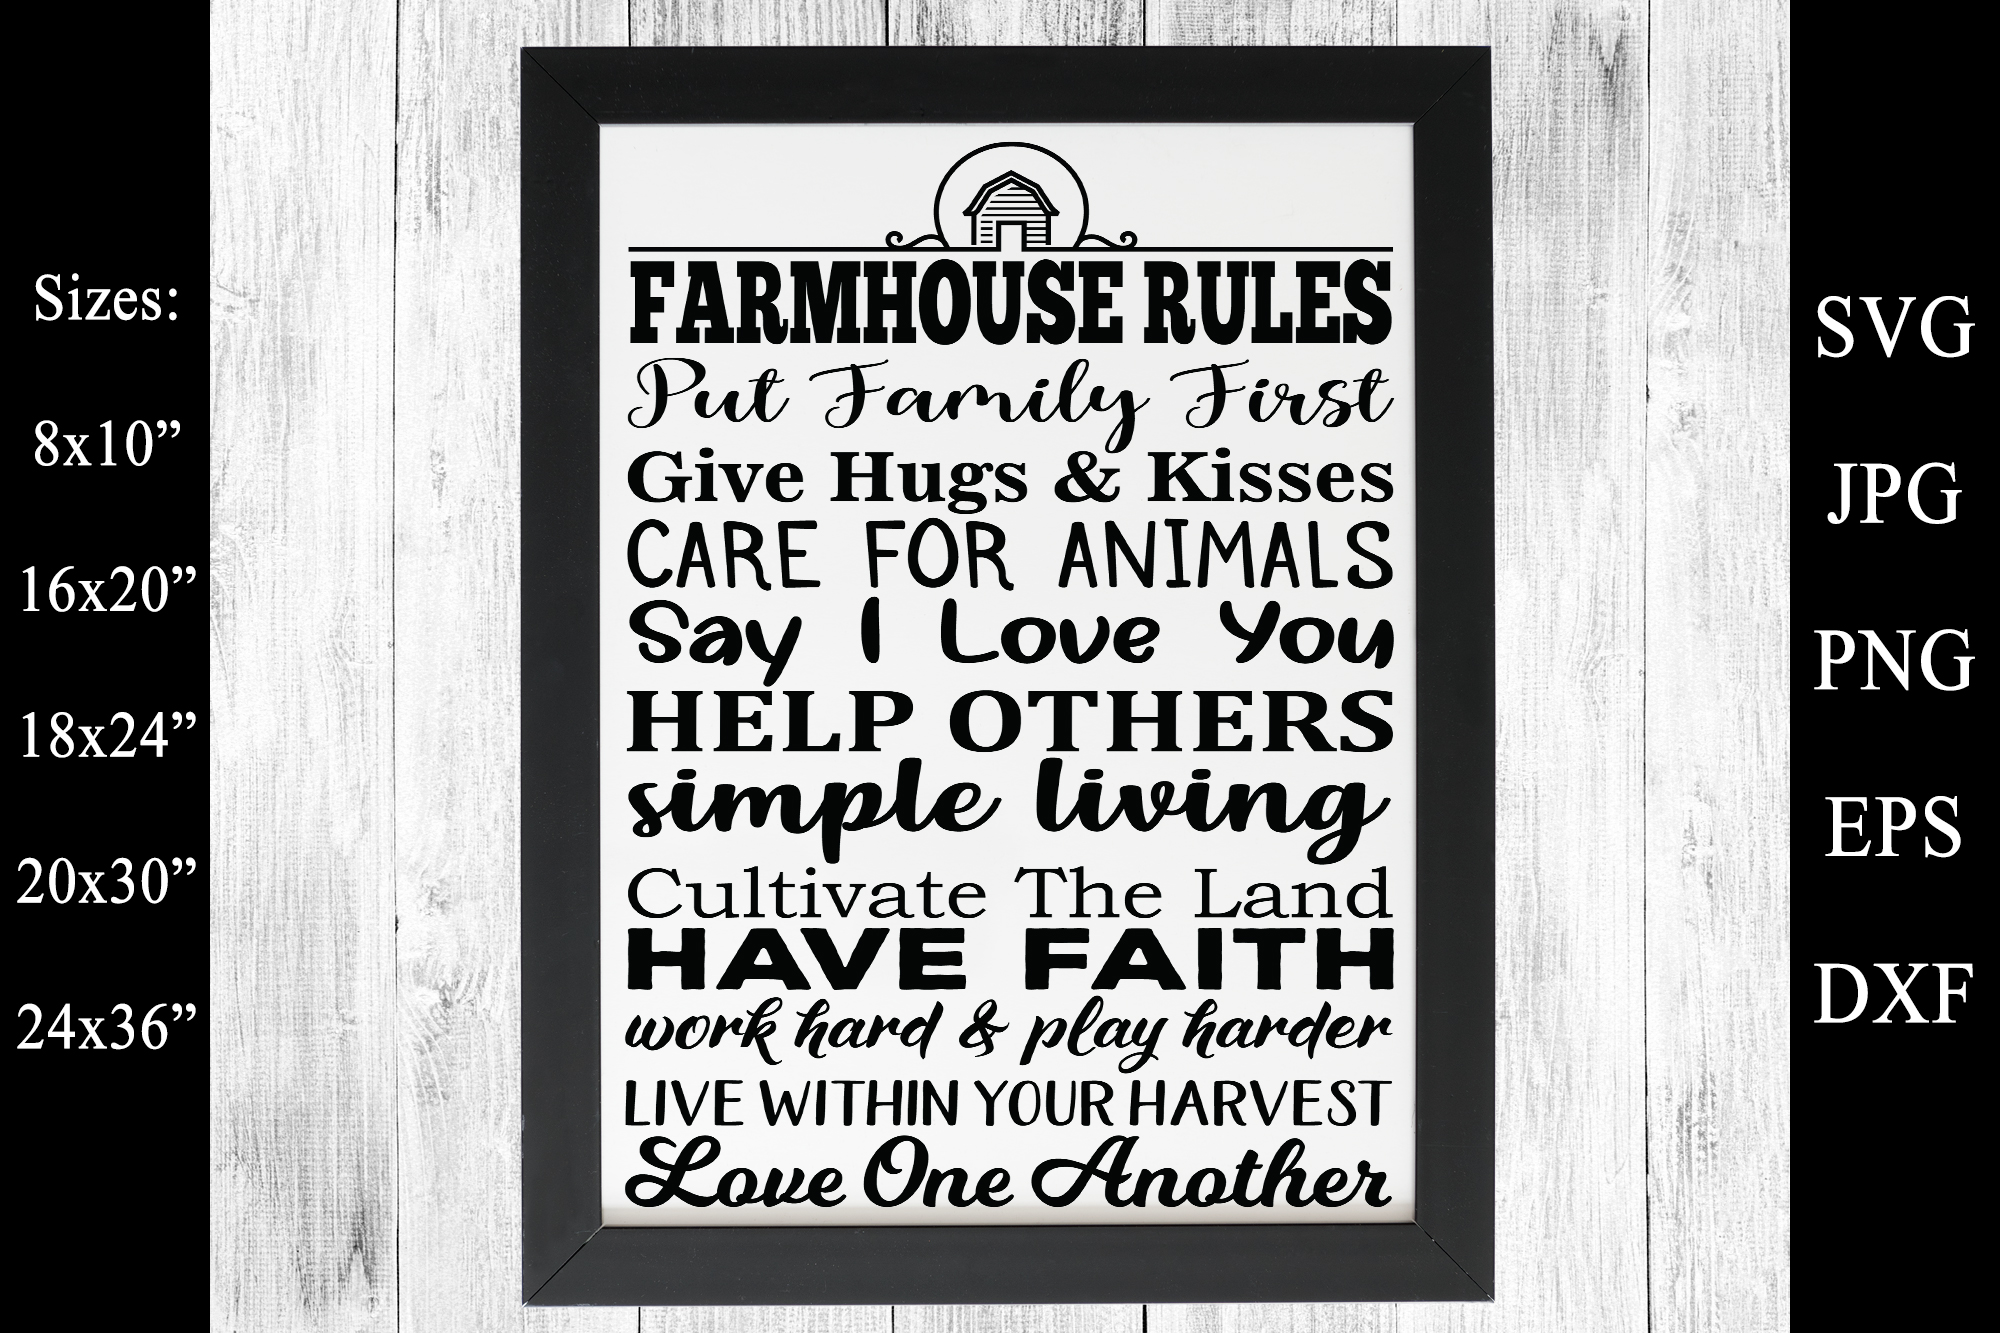 Download Farmhouse Rules SVG EPS PNG Farmhouse Rules Cut File